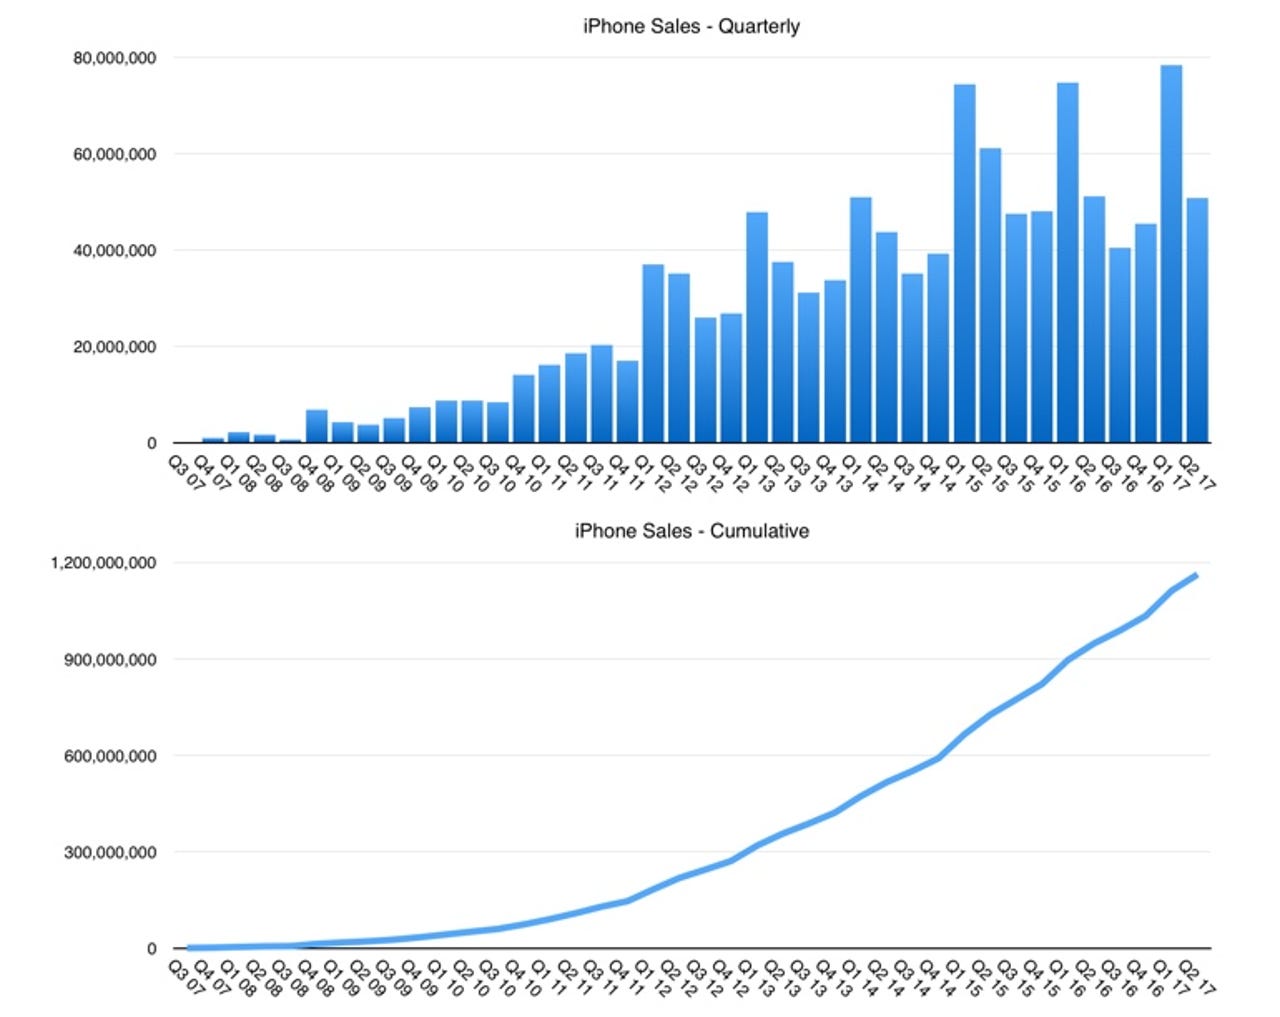 iPhone sales to 2Q 17